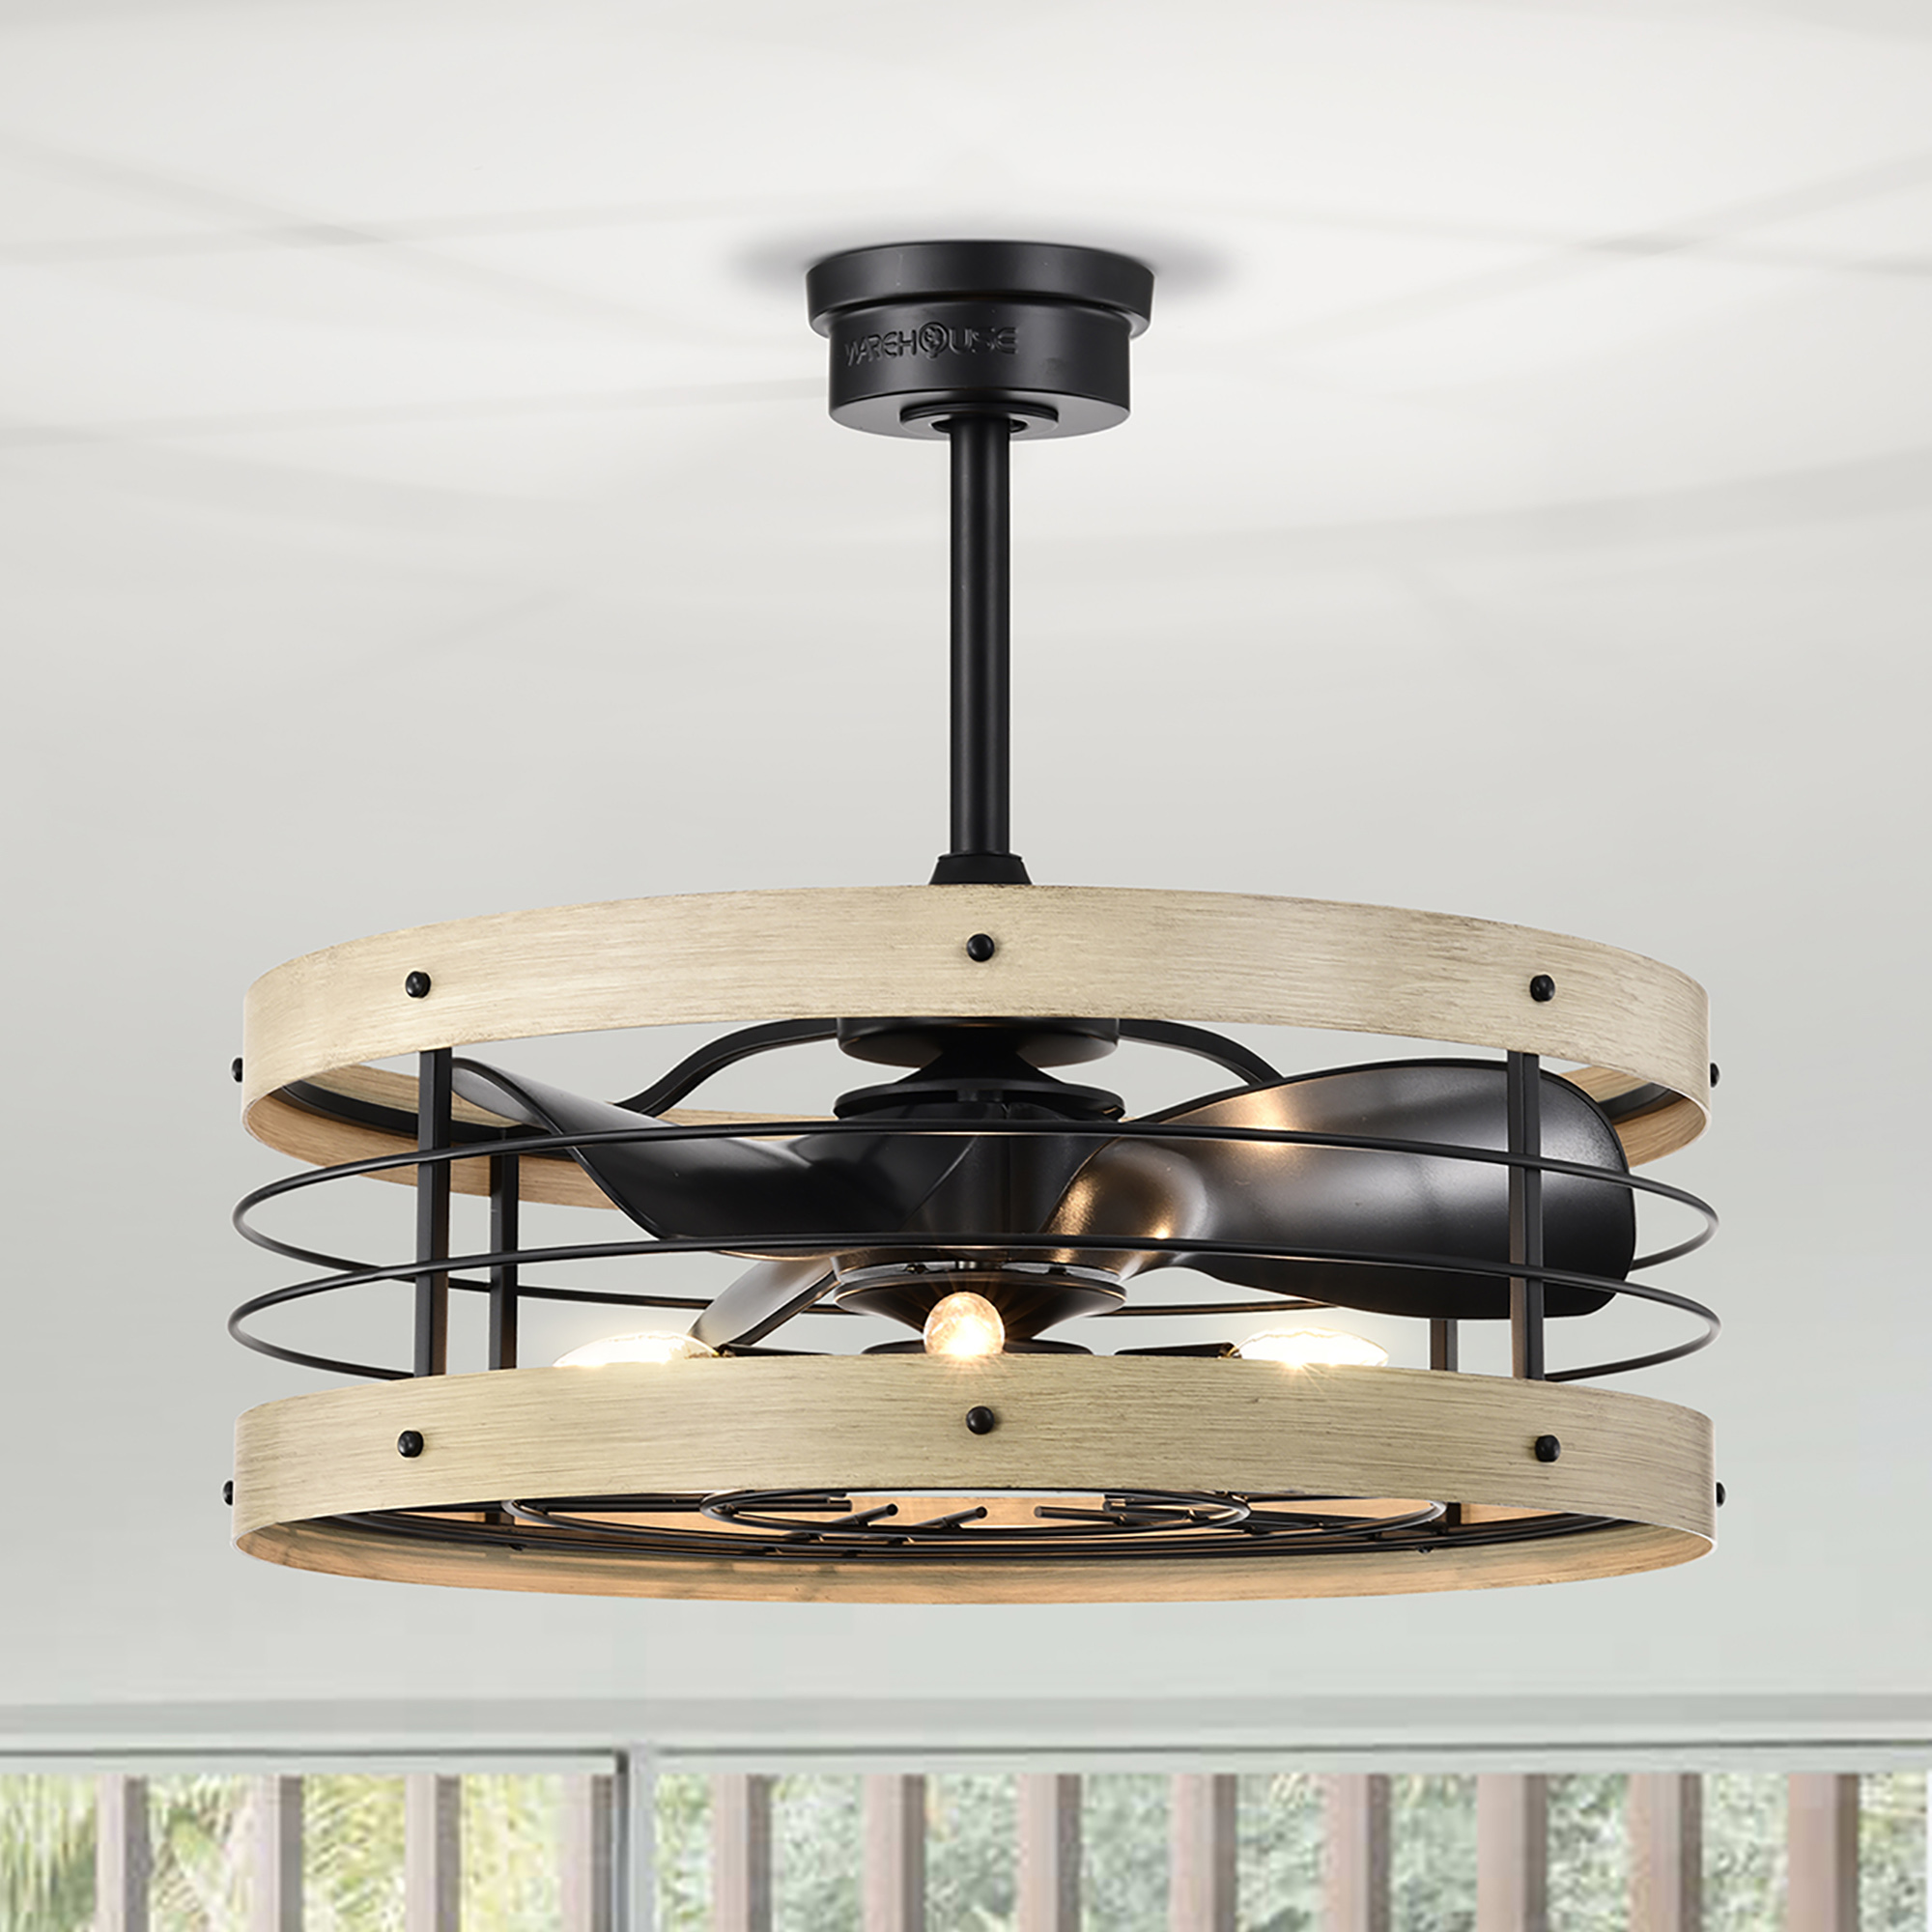 Zulu 25 in. 5-Light Indoor Matte Black and Faux Wood Grain Finish Ceiling Fan with Light Kit